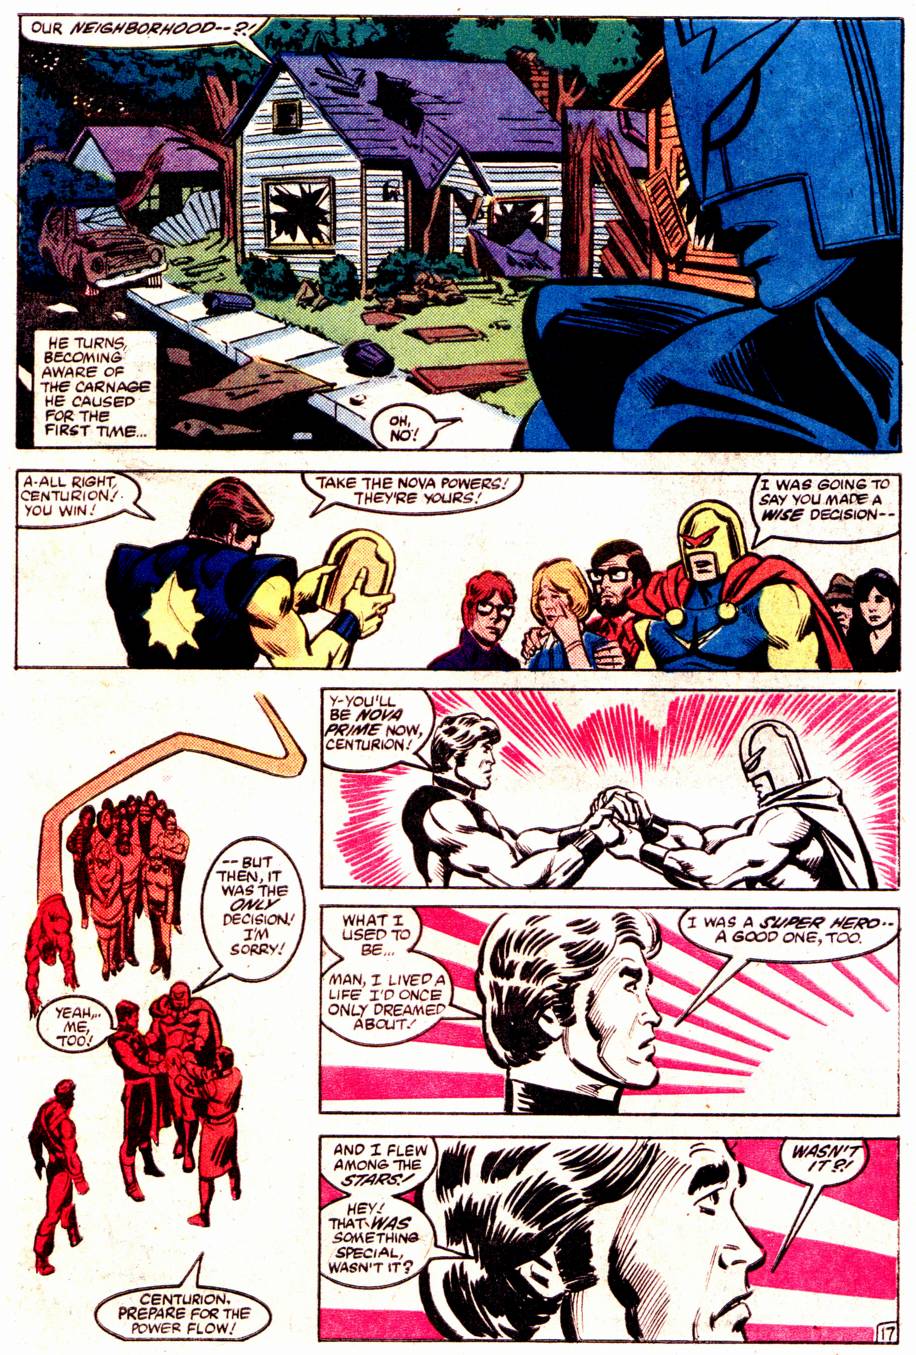 What If? (1977) issue 36 - The Fantastic Four Had Not Gained Their Powers - Page 38